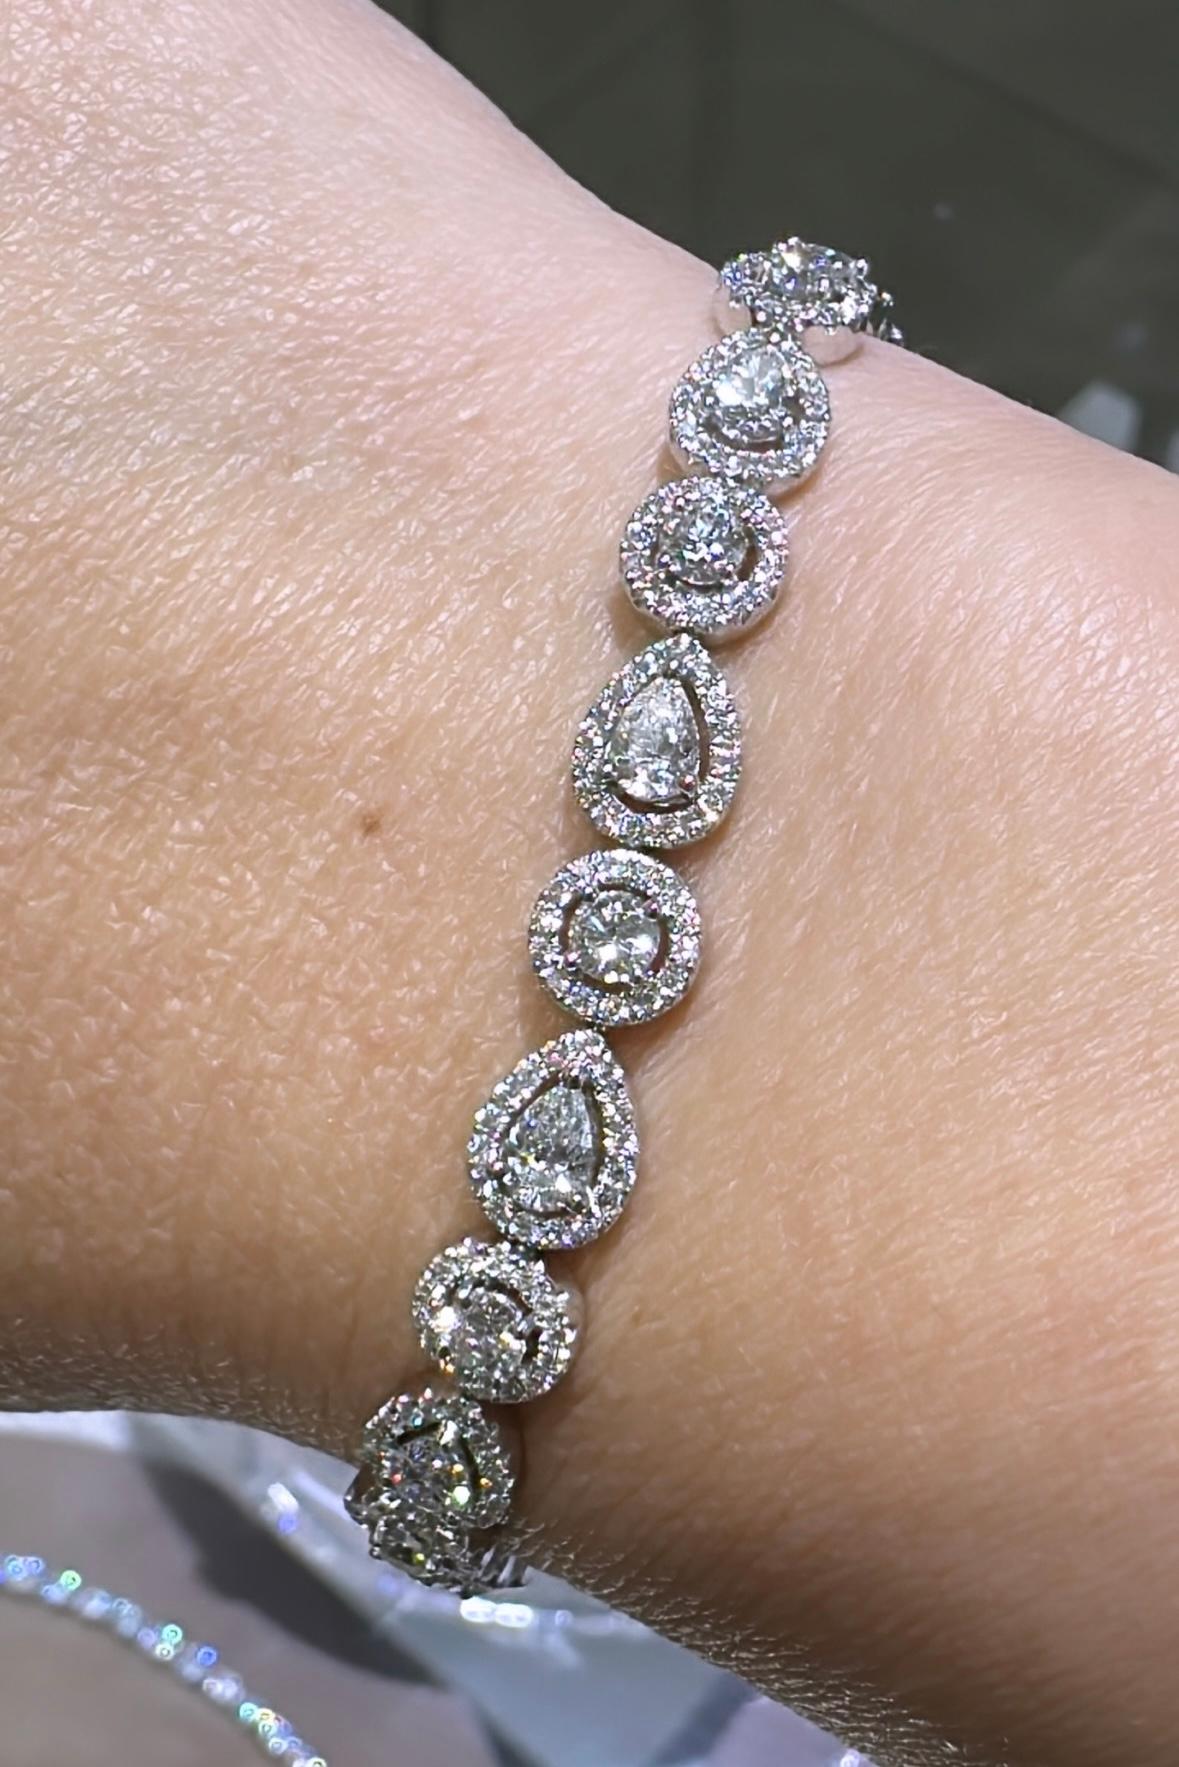 Splendid 5.84carats diamond tennis bracelet will make her shine with glory once you put it on her wrist. Absolutely gorgeous setting with round and pear-shaped diamonds that will sit comfortably on her wrist without ever breaking.
Metal: 18K White